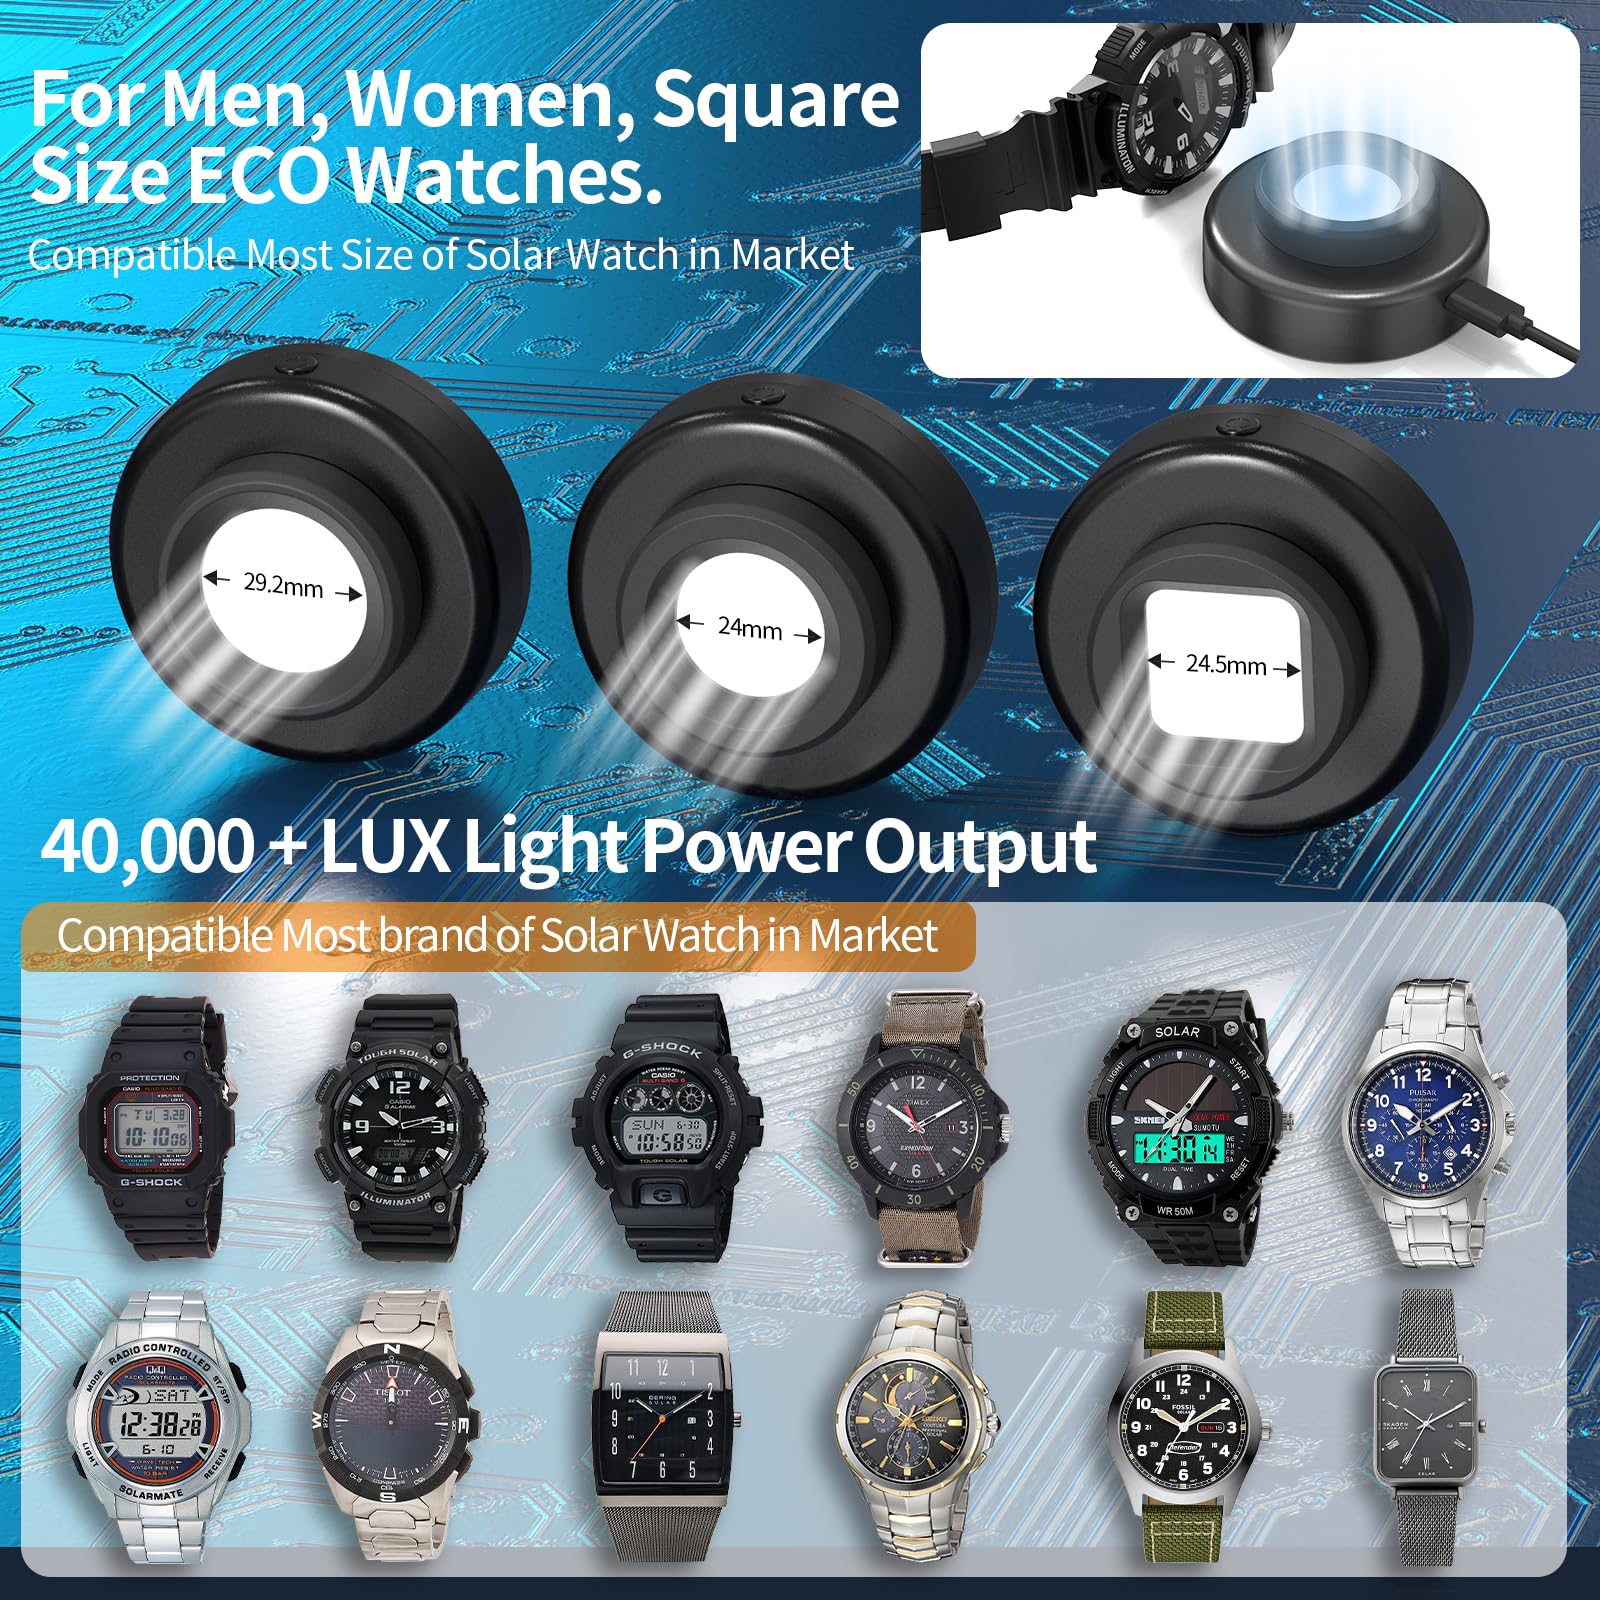 ECEEN Solar Watch Charger, 8 Hours Timing Off with Men, Women & Square 3 Caps, LED UV Light Charge Eco Driver Watches Compatible Casio/Tough/Protrek/Seiko/Citizen/Garmin/Timex/Bering/FANMIS (Black)